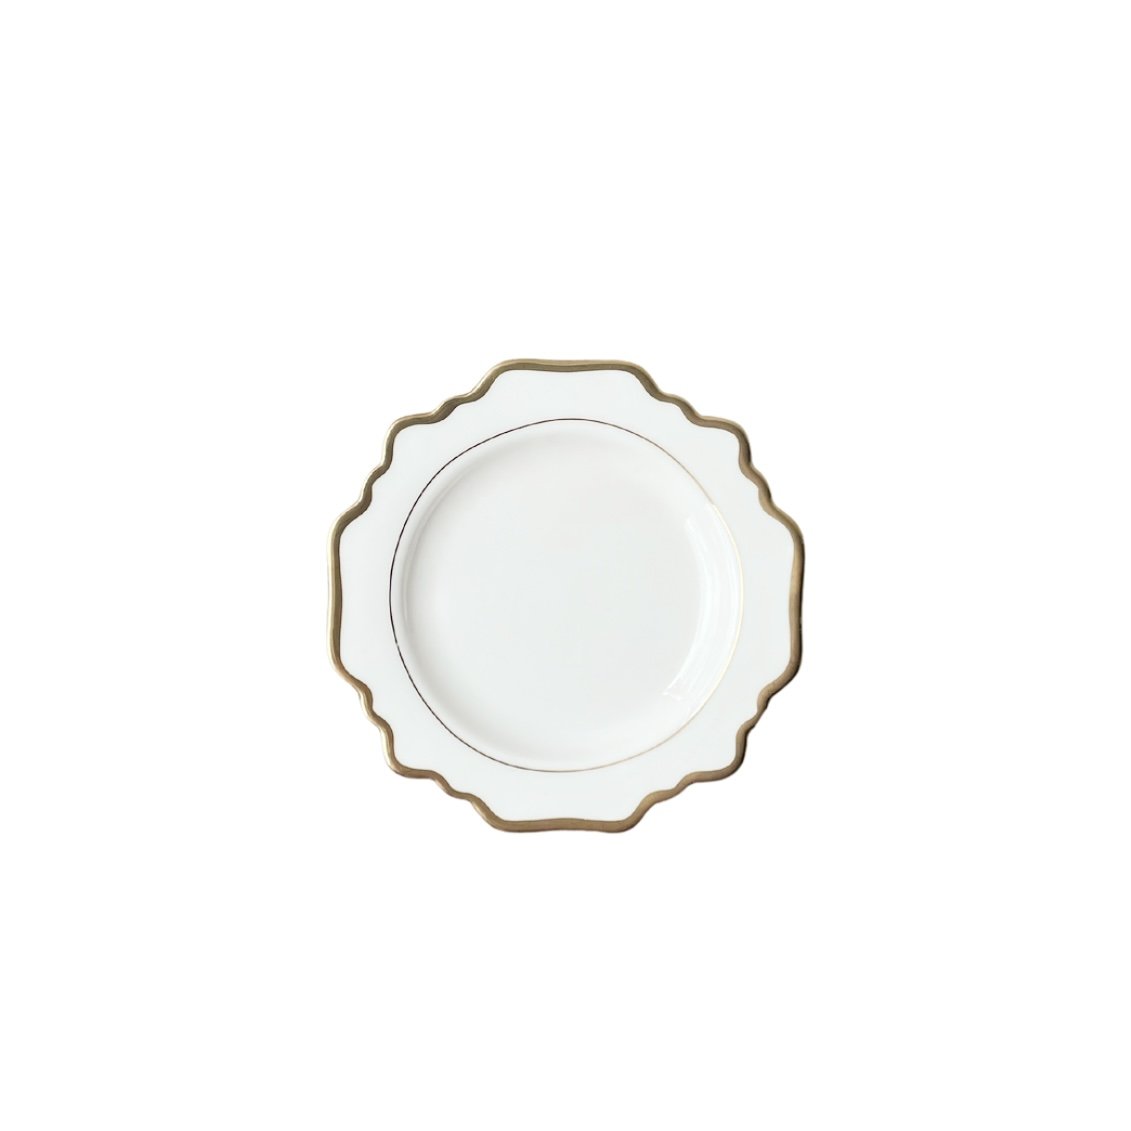 ornate white and gold side plate hire